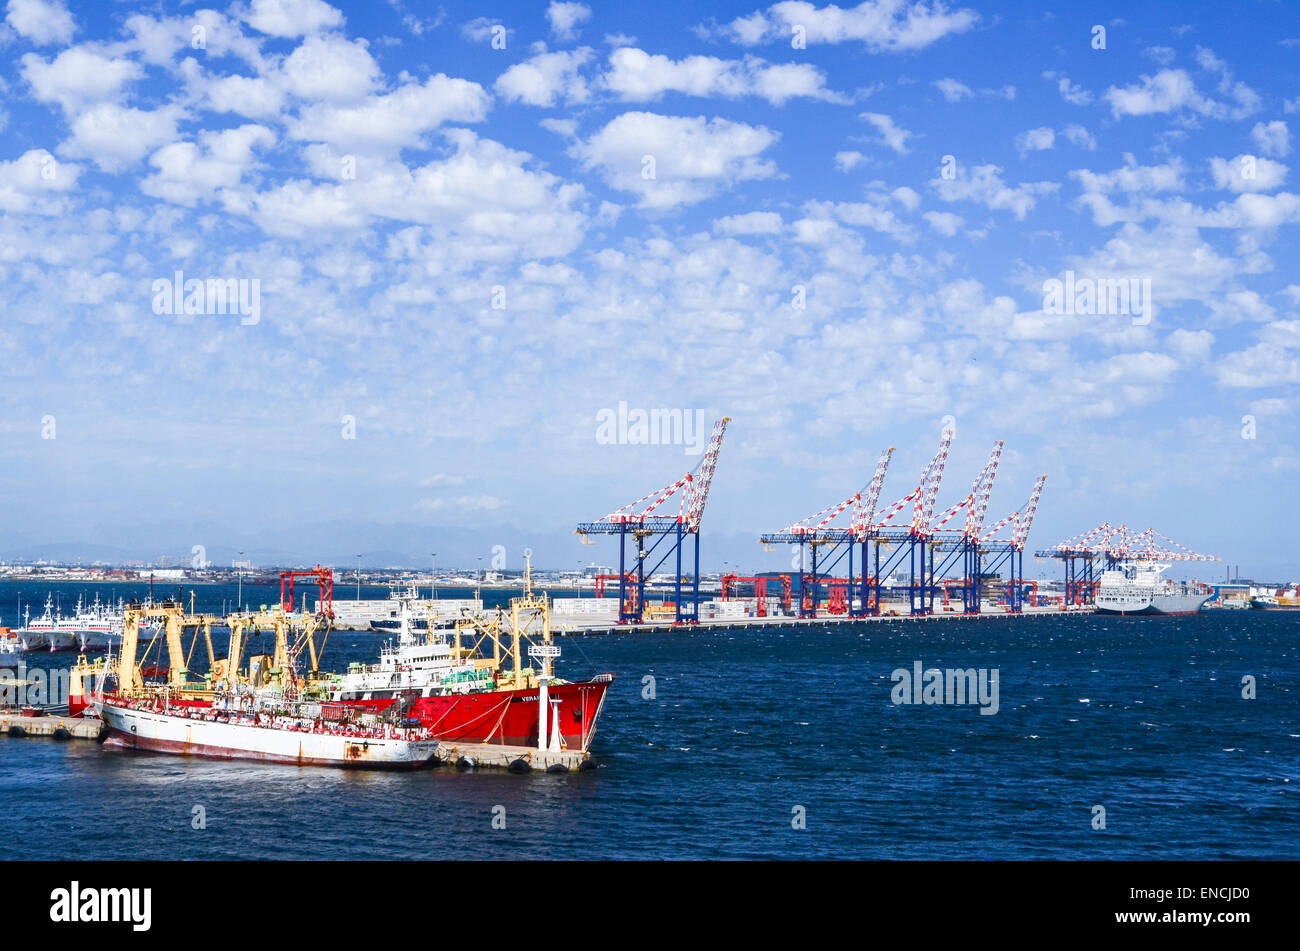 Cranes in the container terminal, port of Cape Town, South Africa Stock Photo